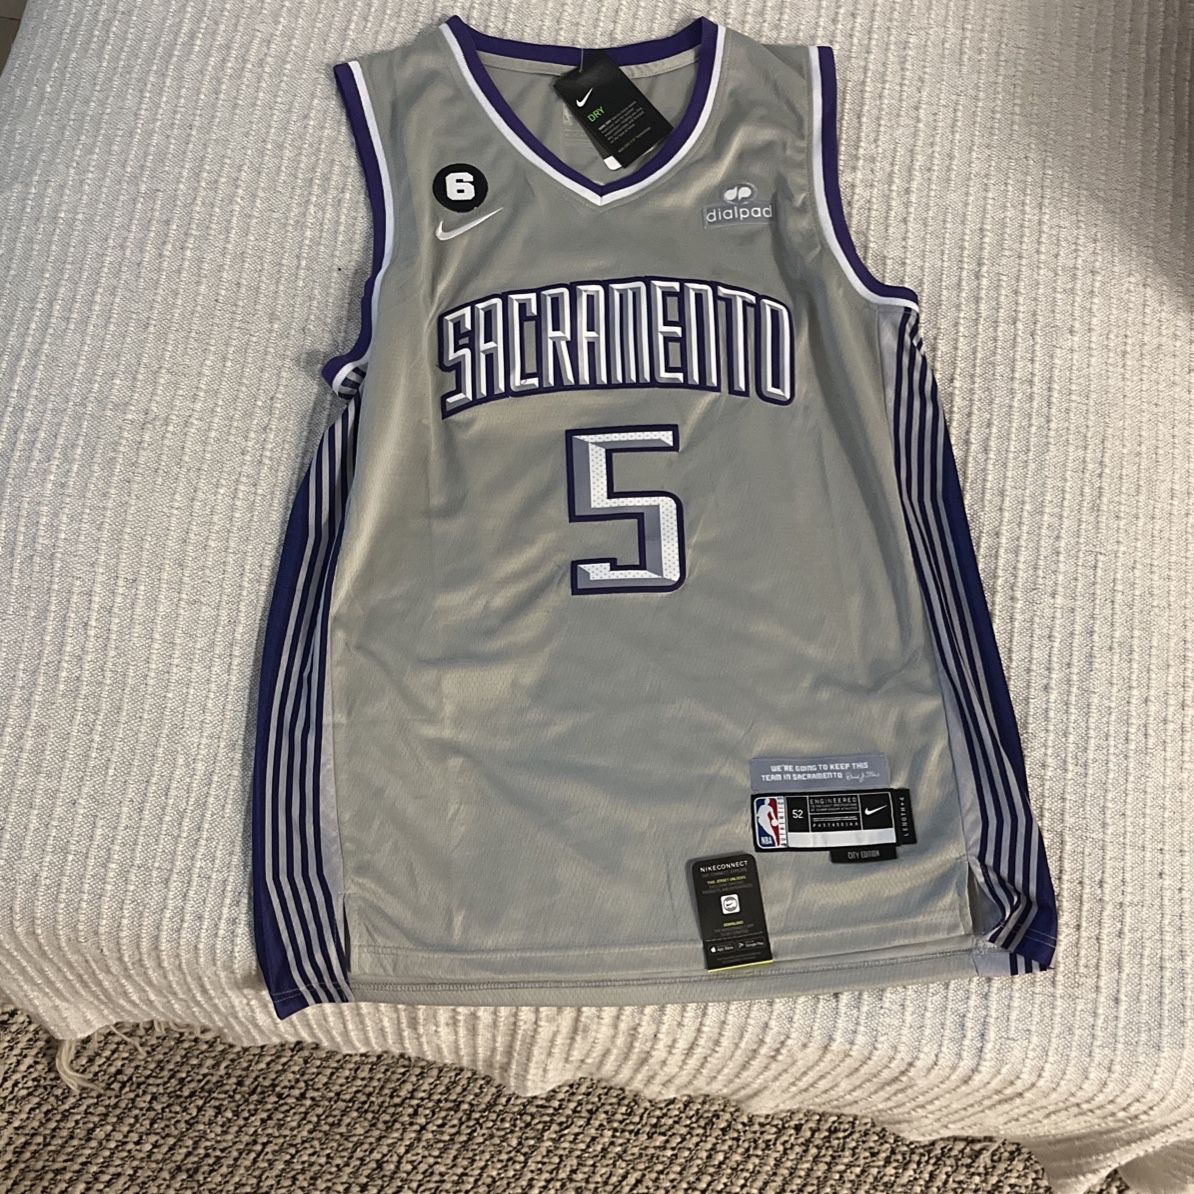 SACRAMENTO KINGS NBA Youth #5 DE'AARON FOX JERSEY for Sale in Ceres, CA -  OfferUp